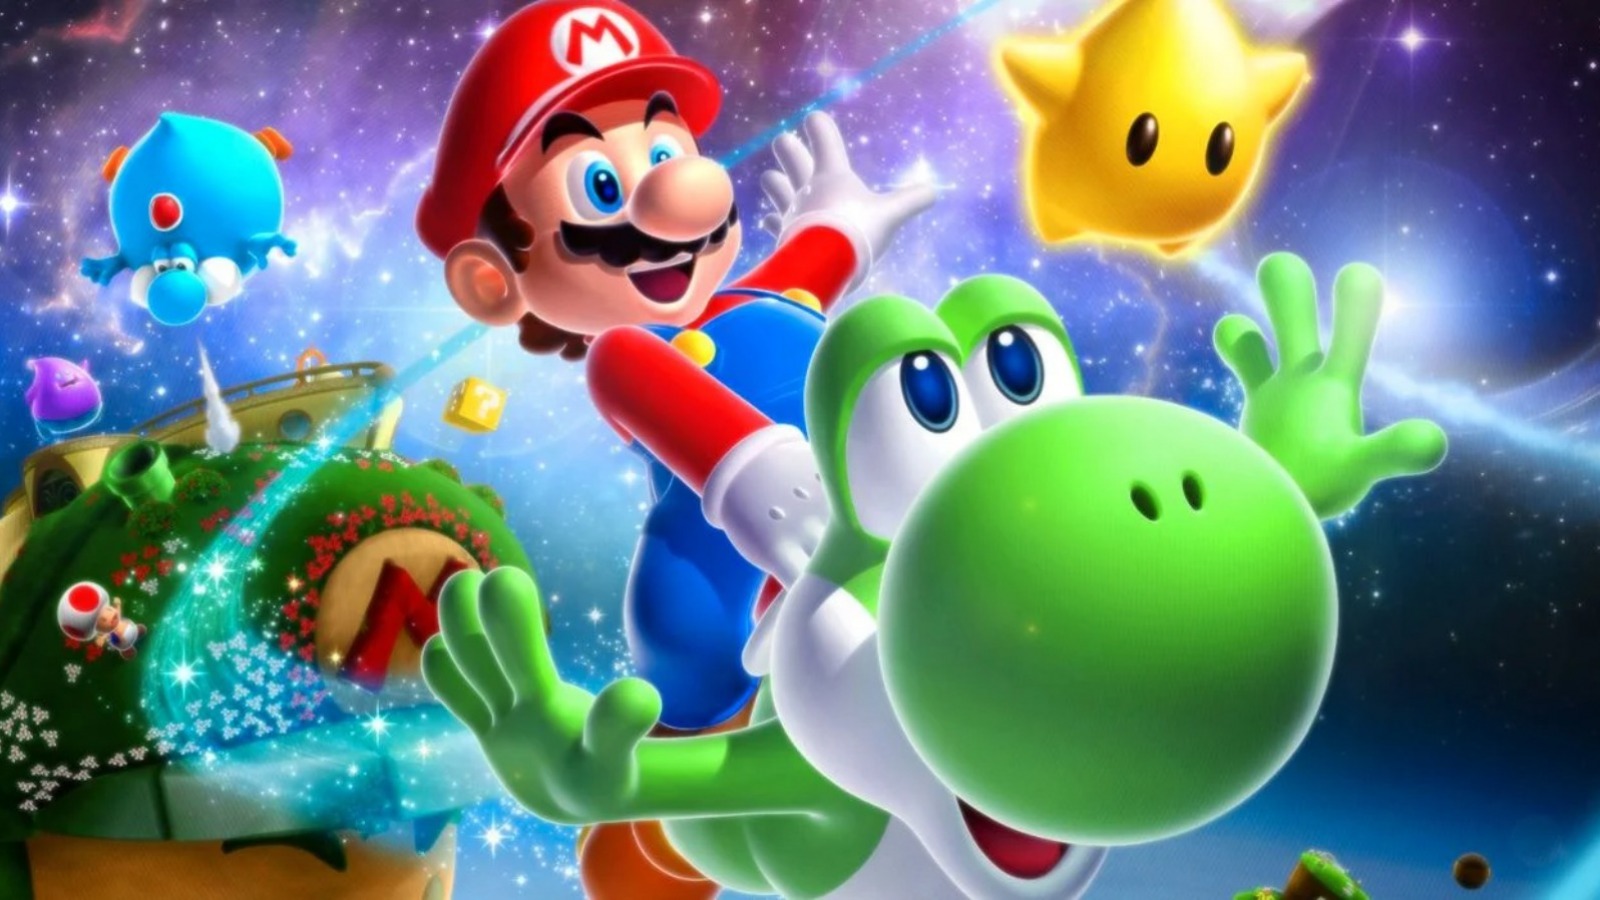 Nintendo Teases Galaxy 2 in Super Mario 3D All-Stars + PS5 Event Rumors are  Crazy! 